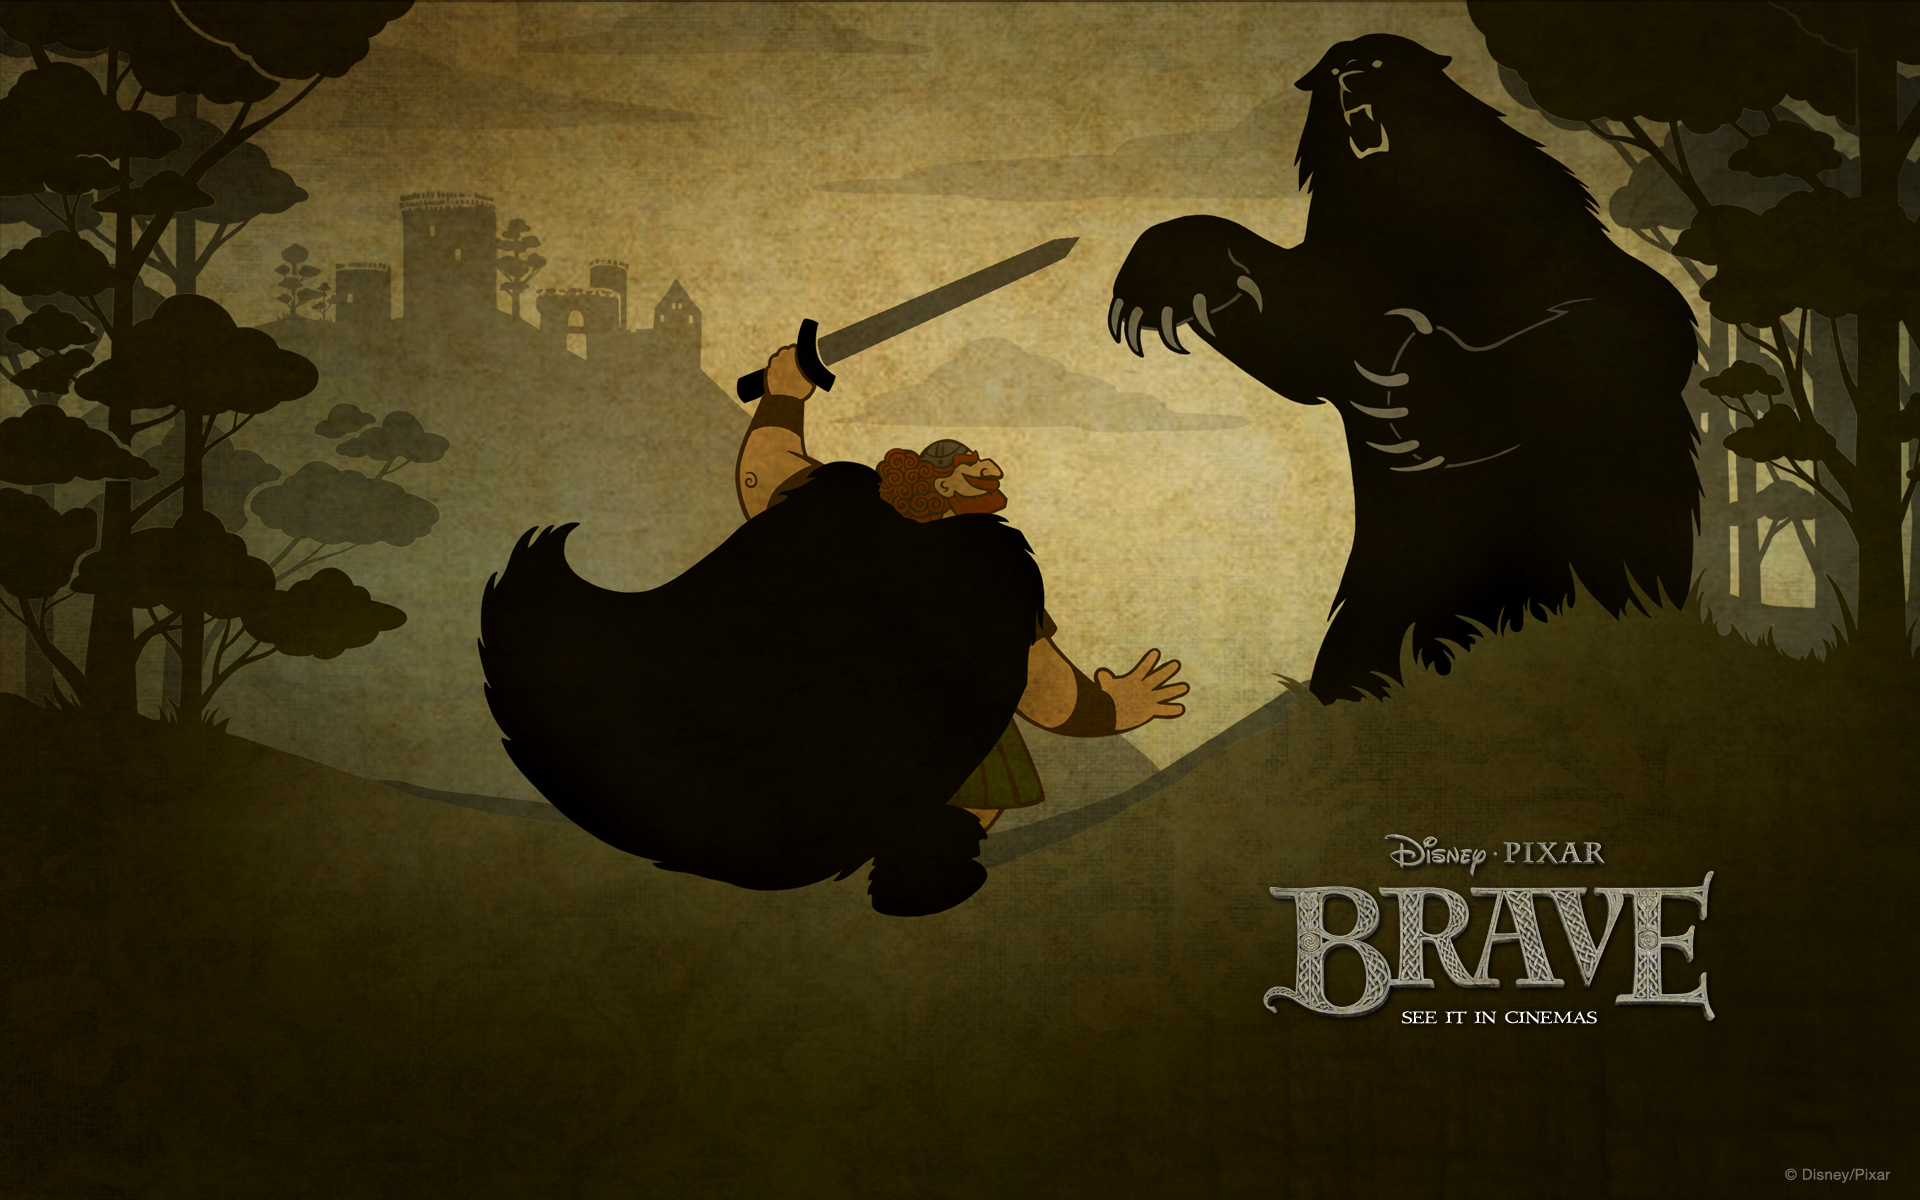 Be Brave Wallpapers